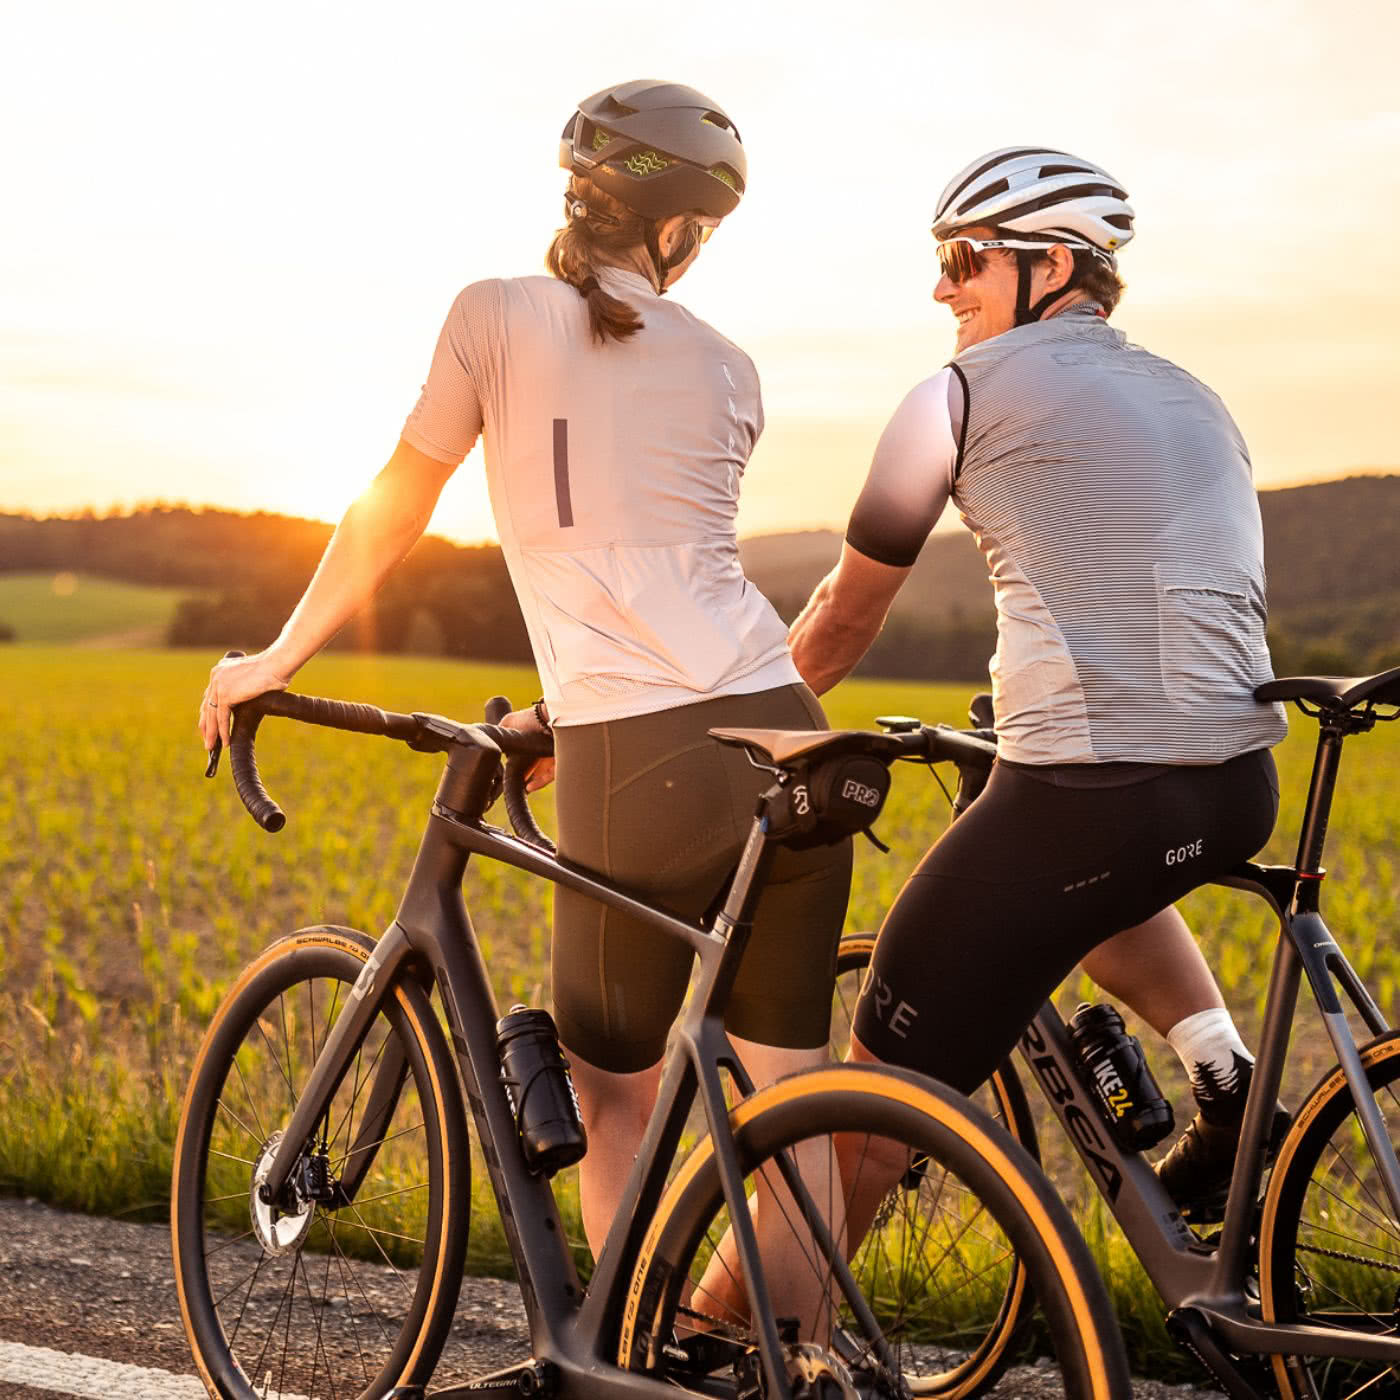 Man and woman on road bikes look into the sunset